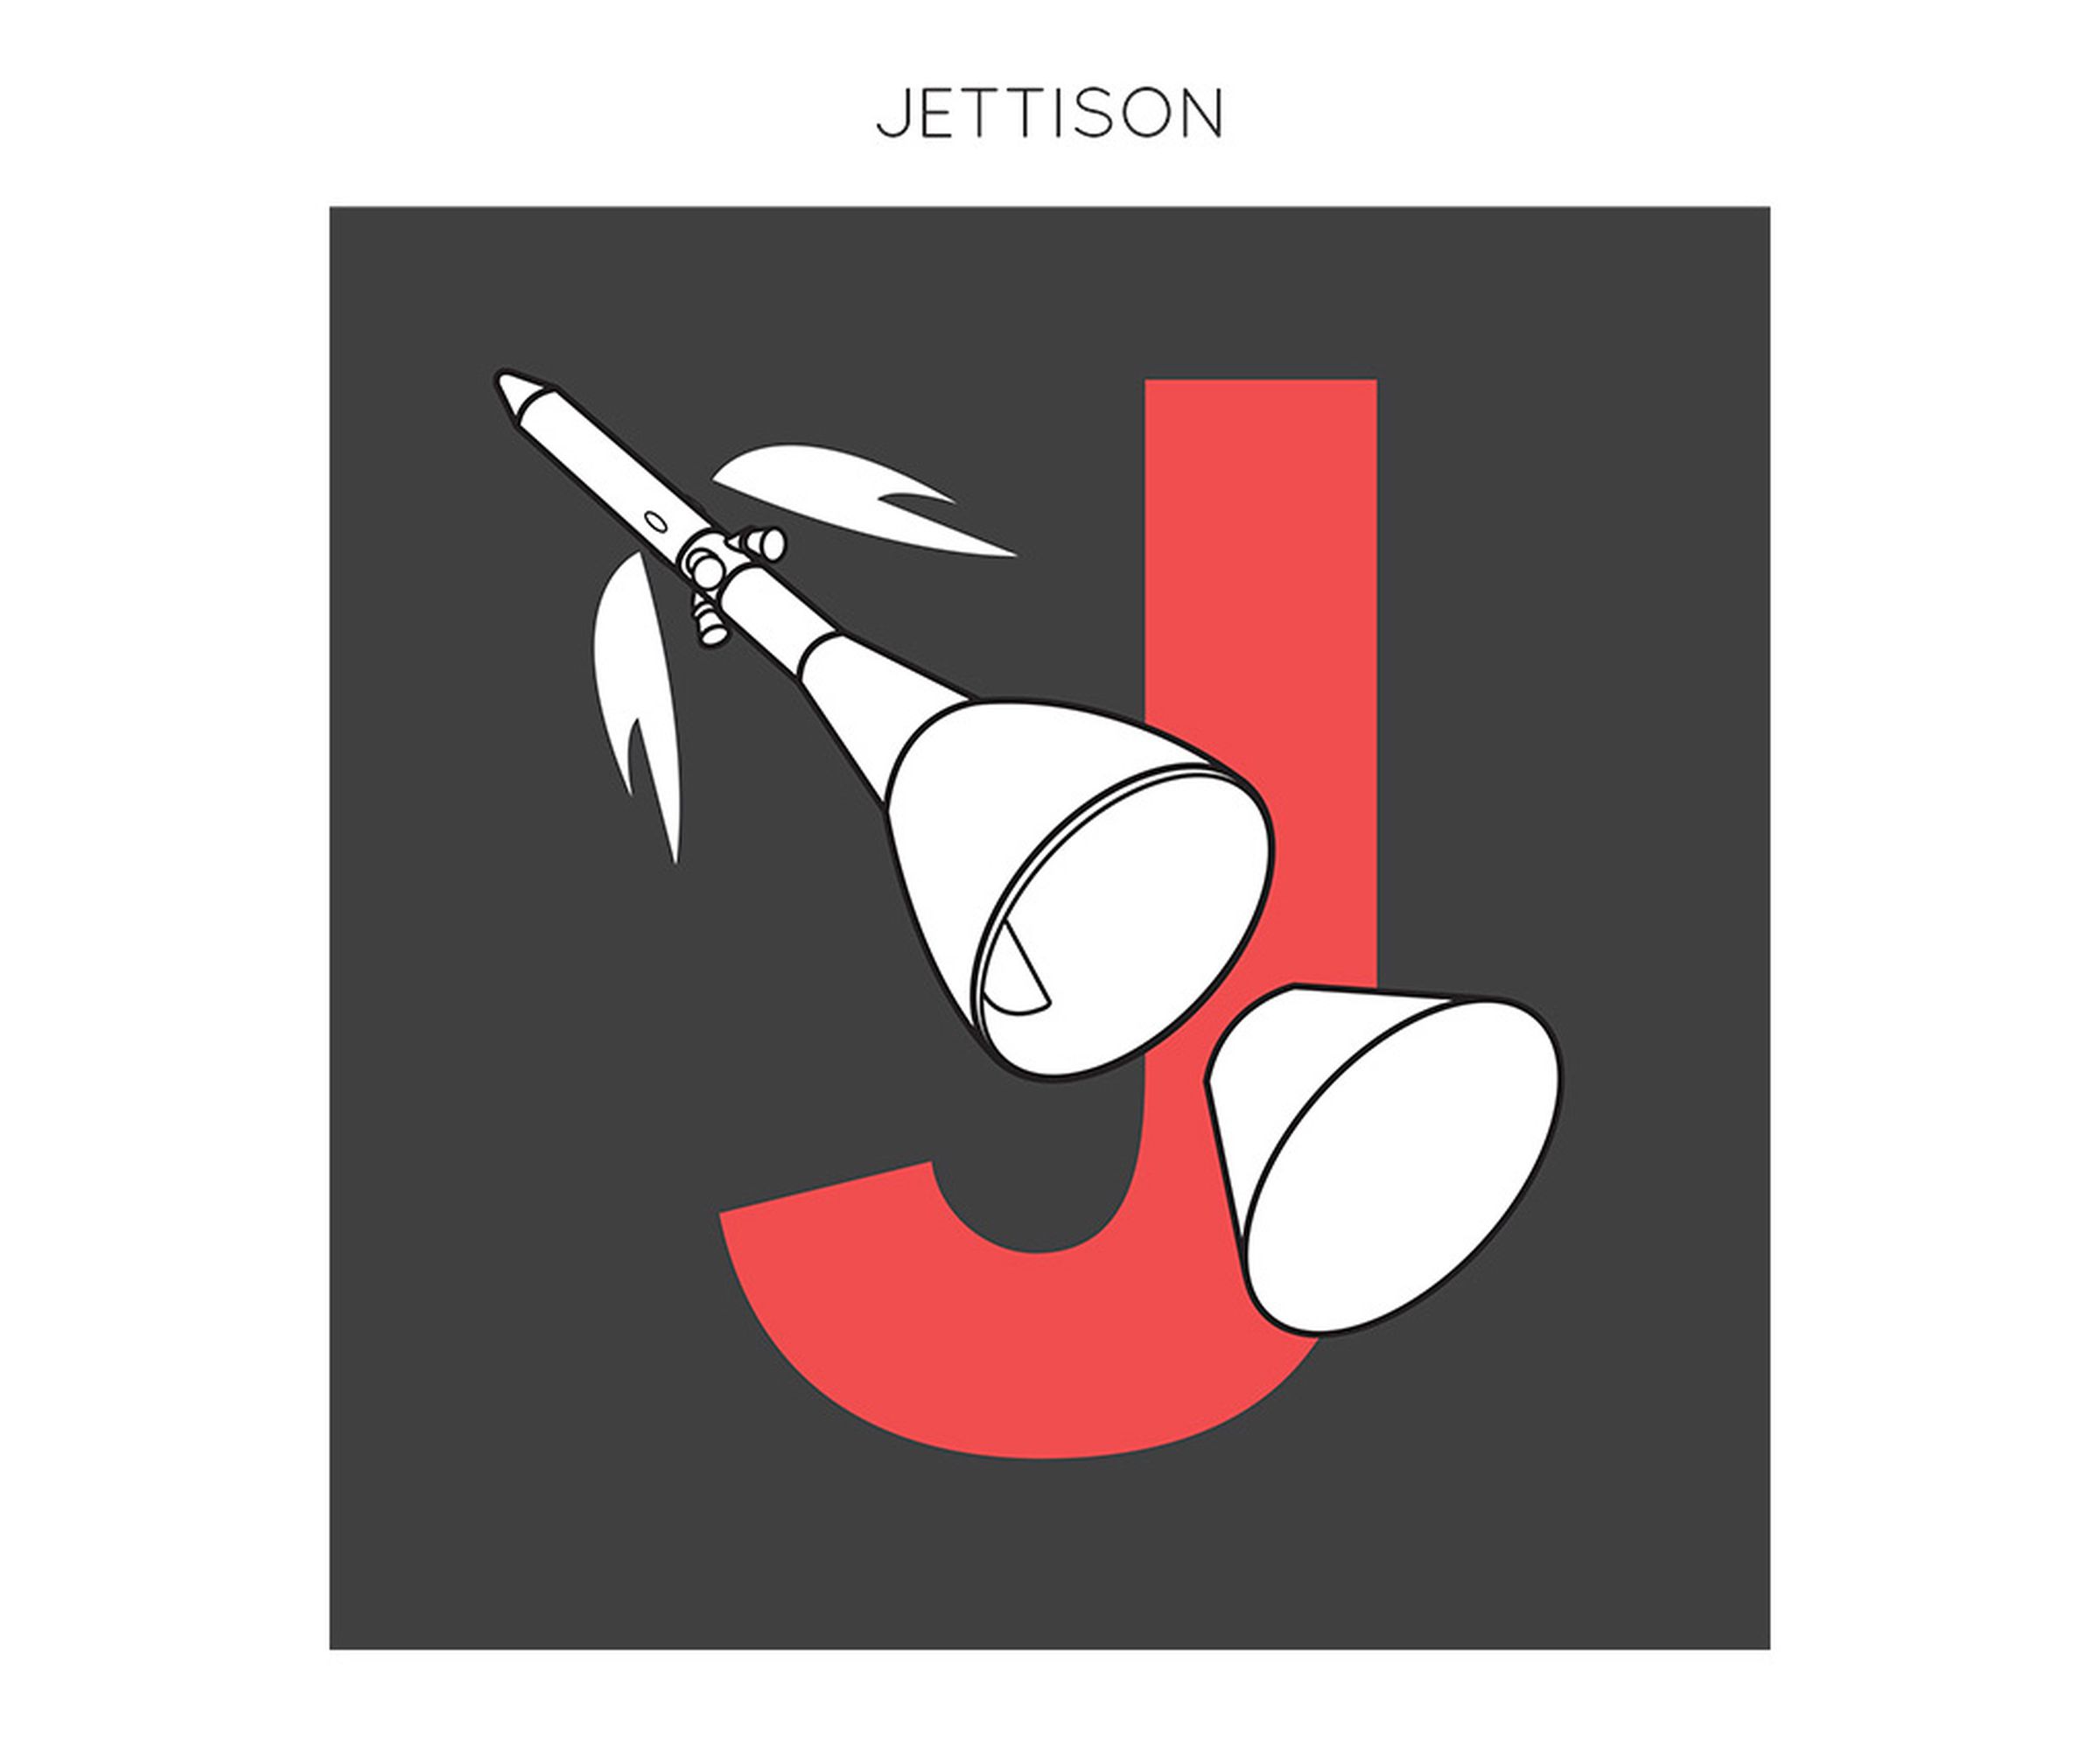 J is for Jettison